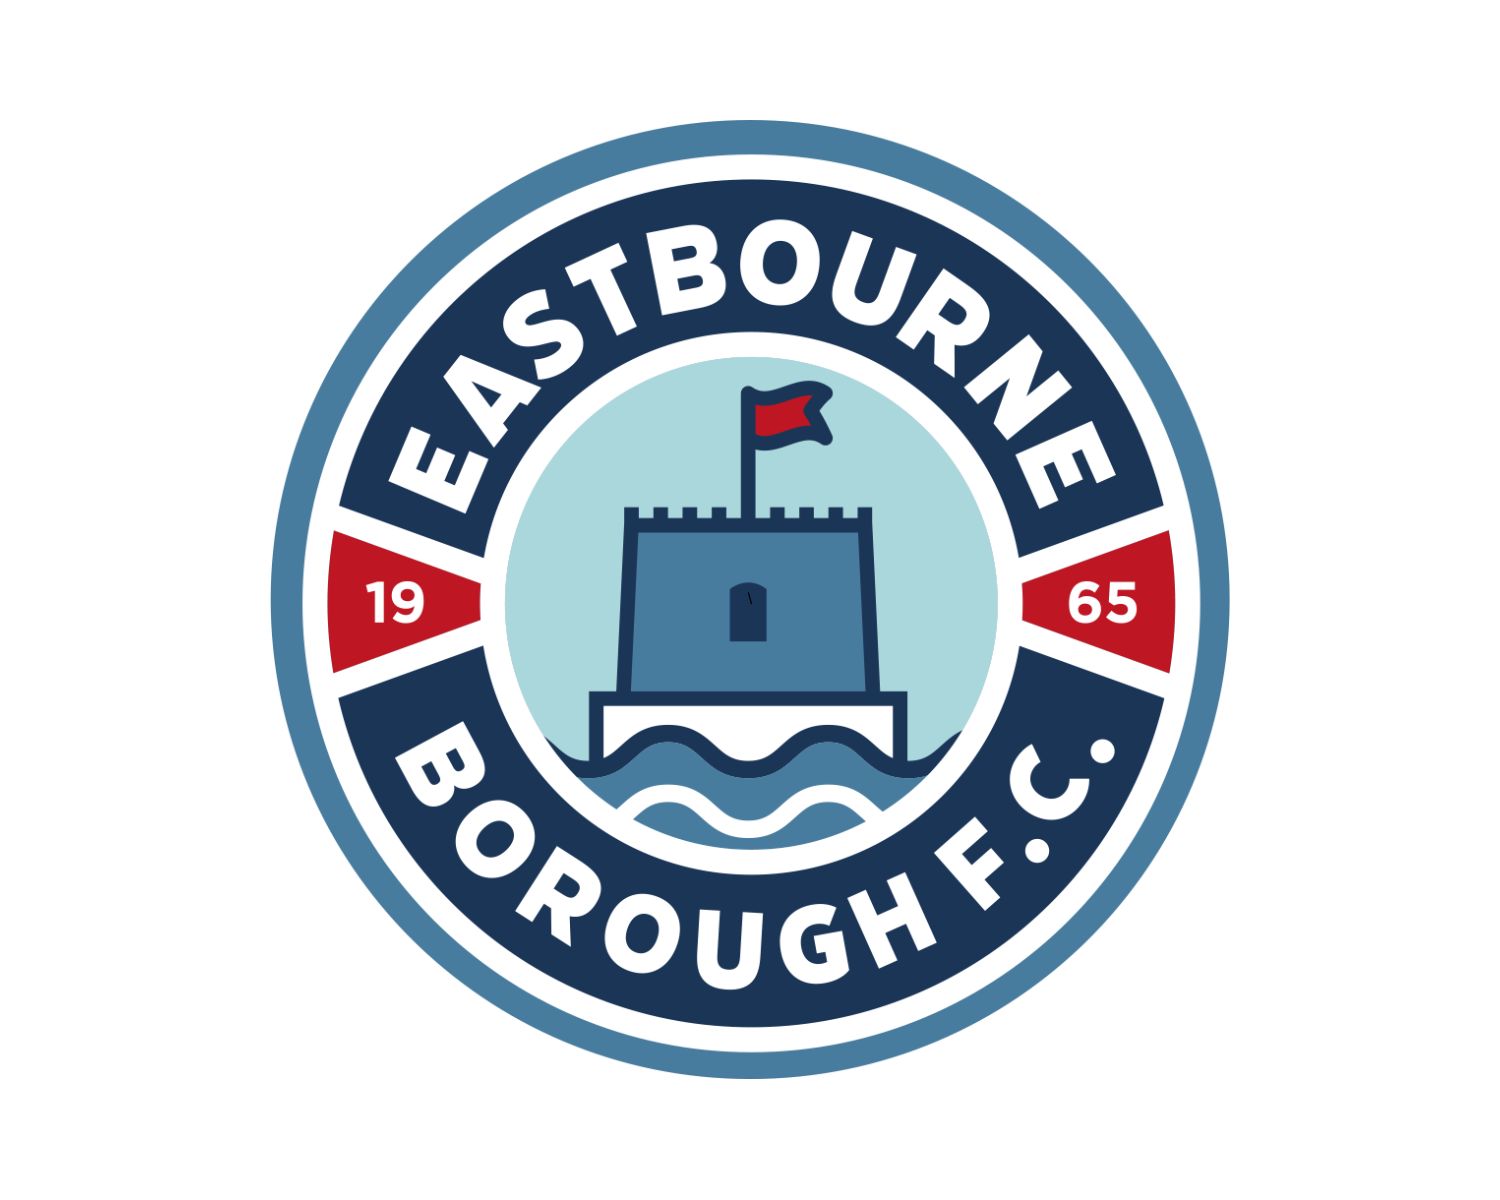 Eastbourne Borough FC: 20 Football Club Facts - Facts.net